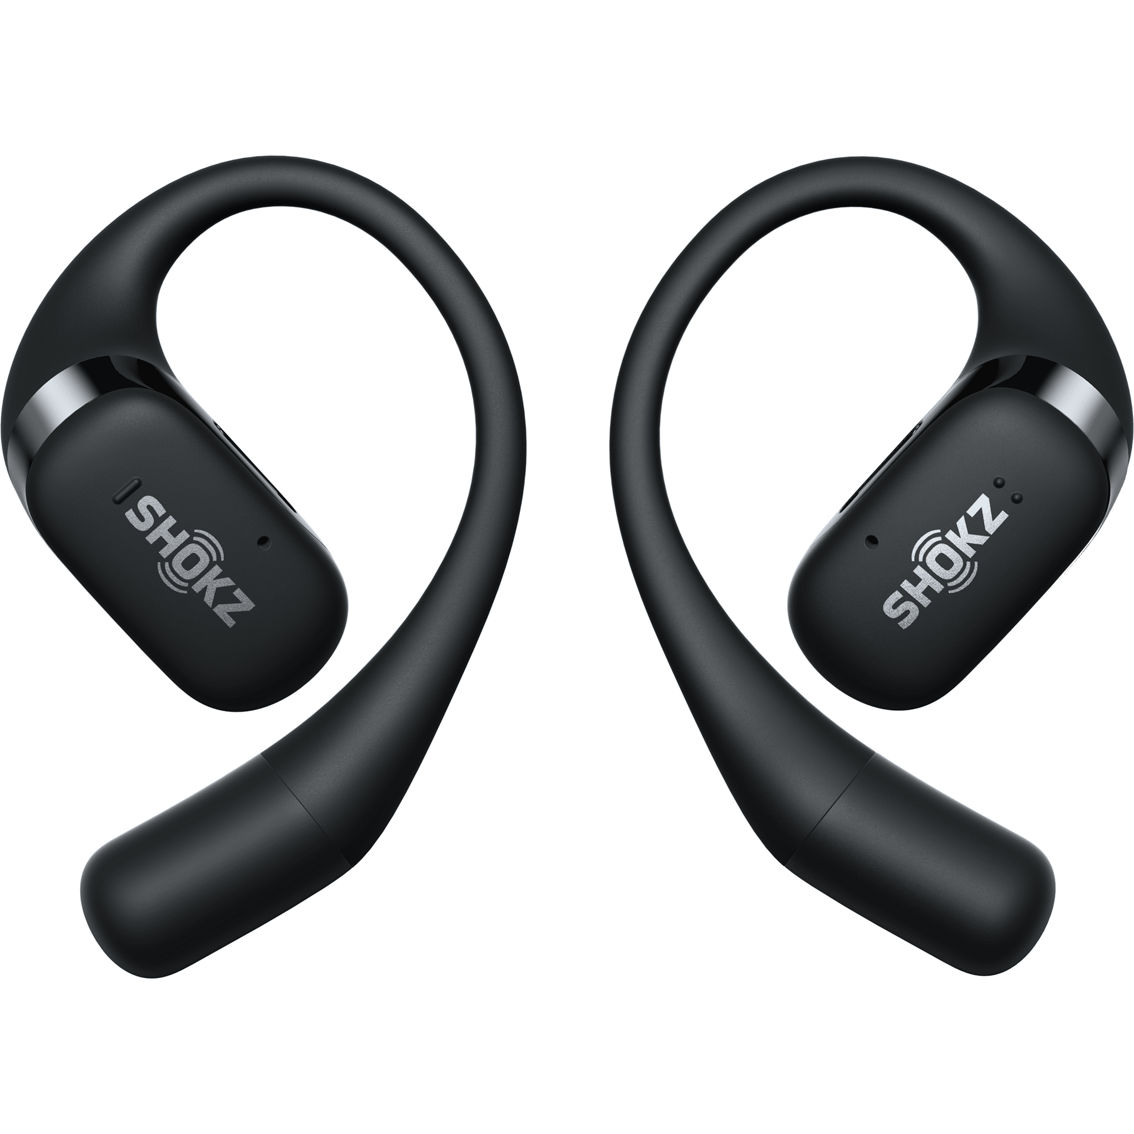 After Shokz OpenFit True Wireless Earbuds - Image 4 of 4